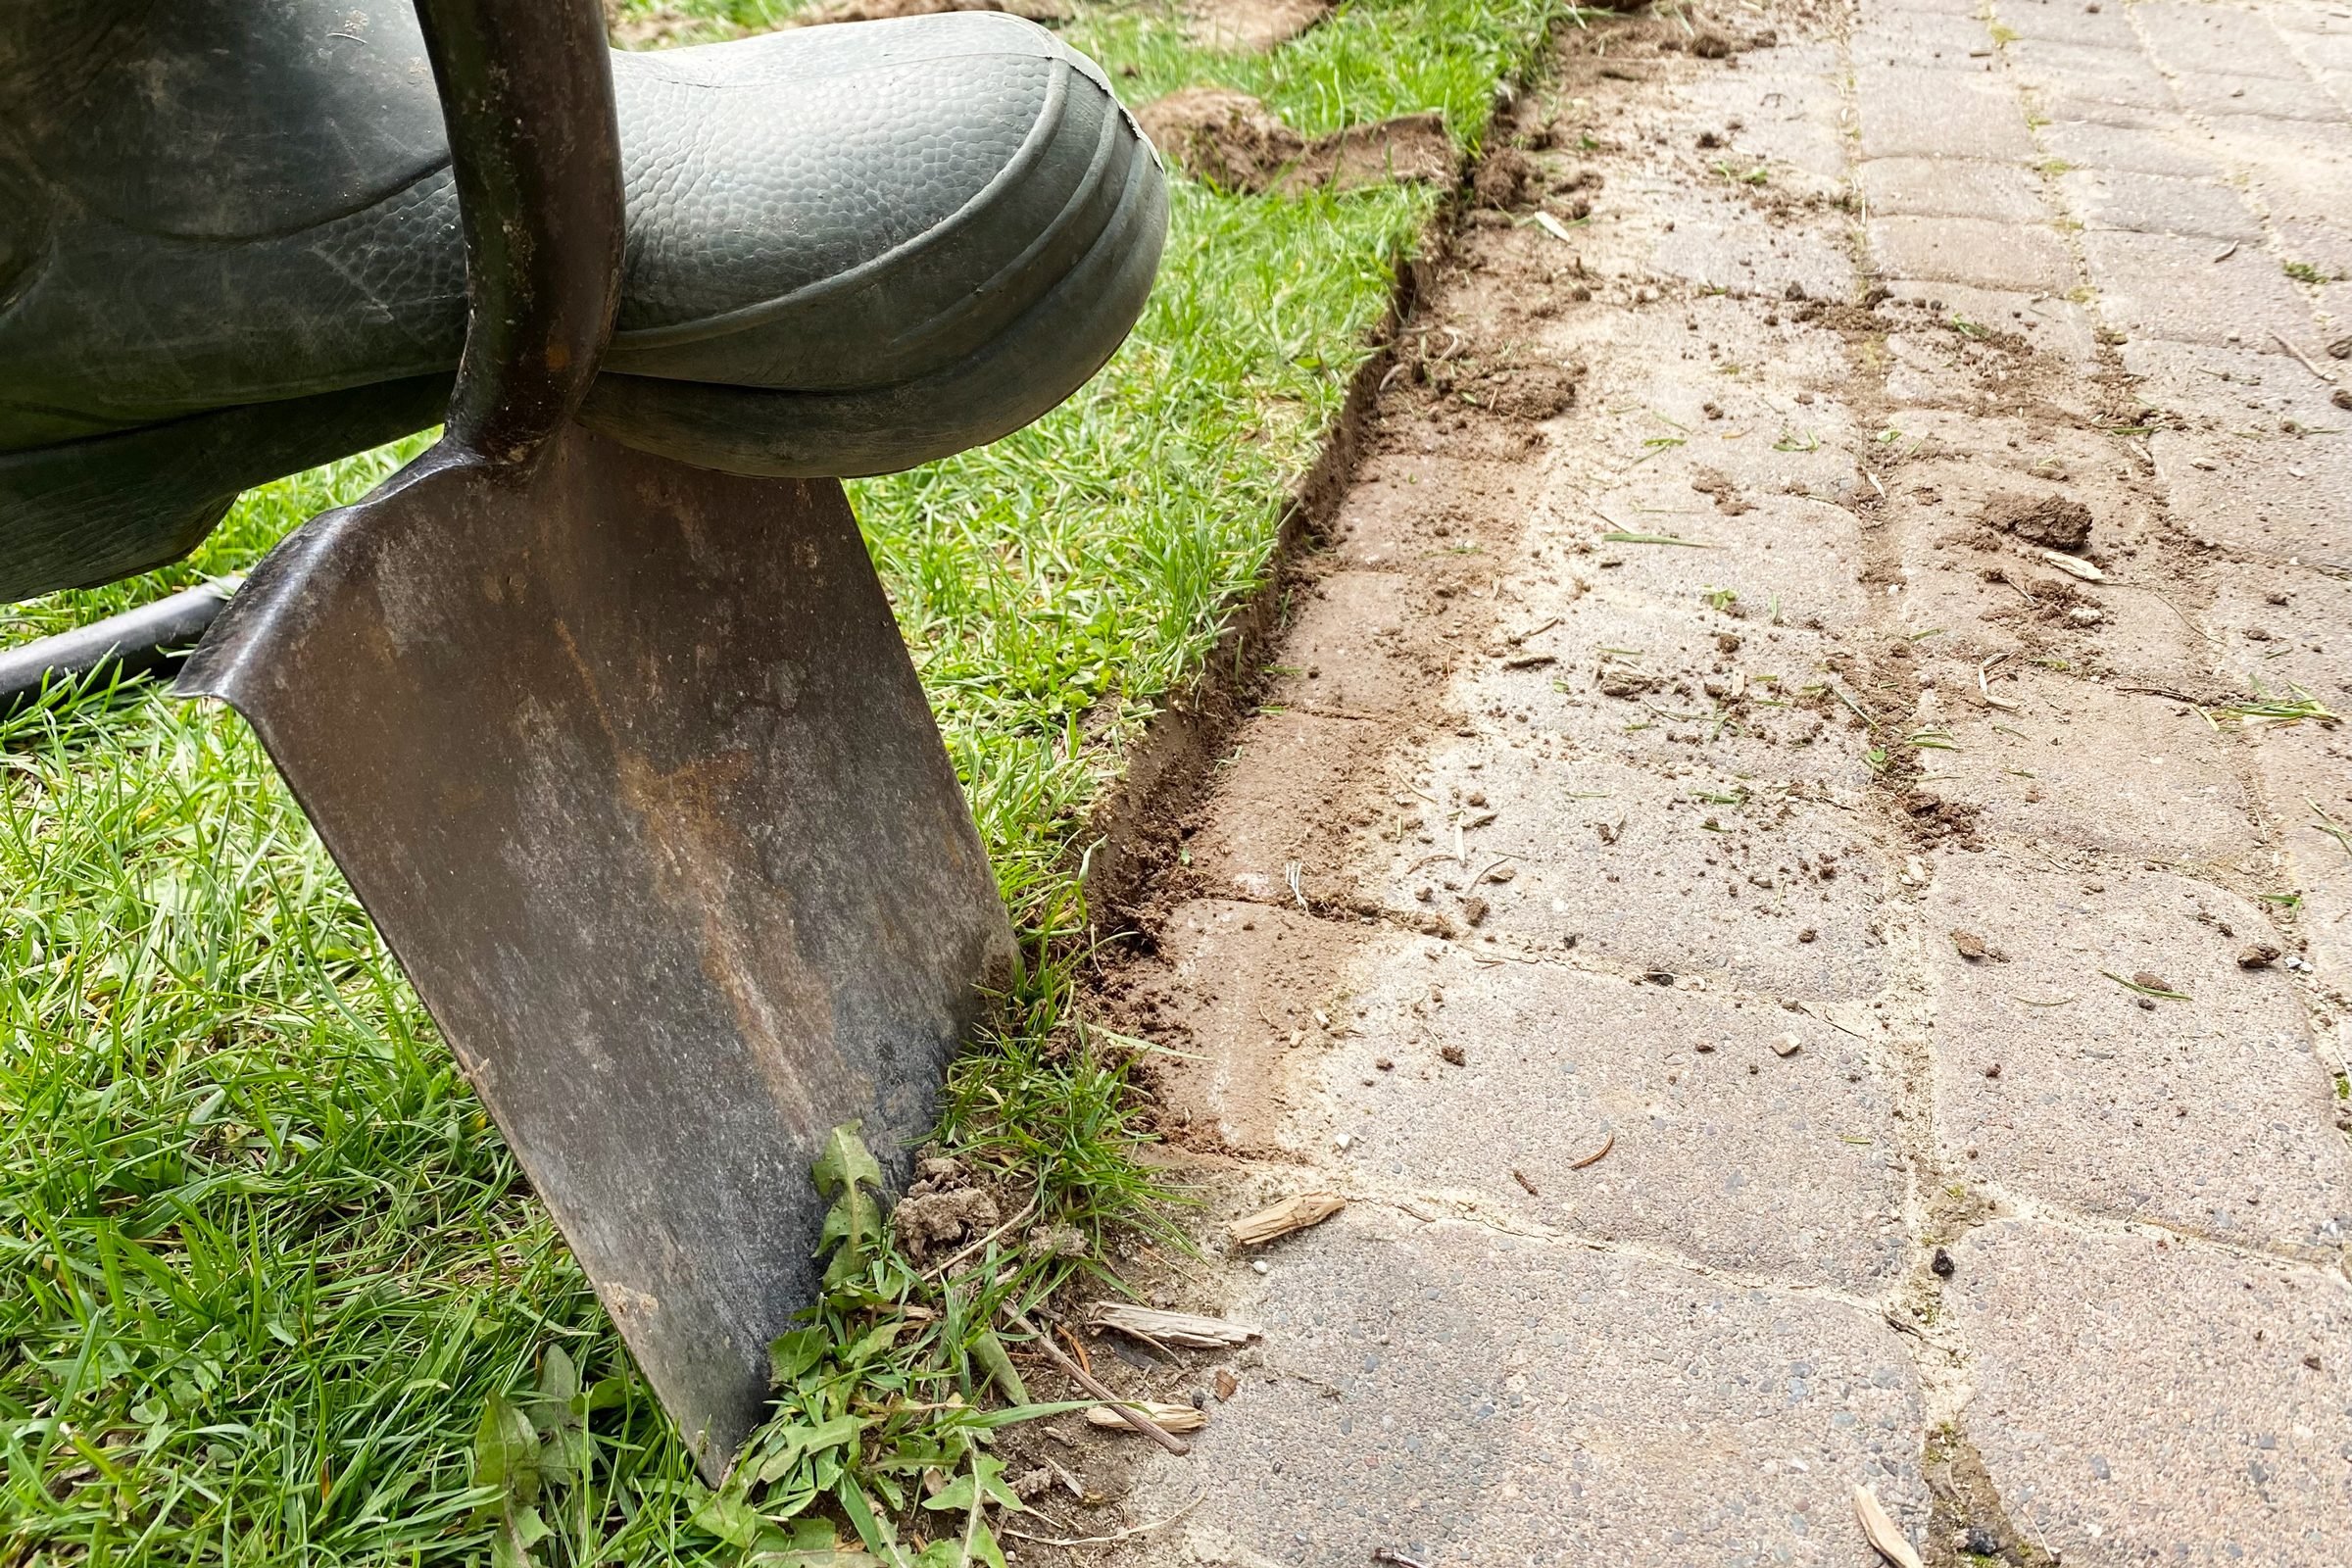 creating sharp edges in the grass next to the pavers with a shovel